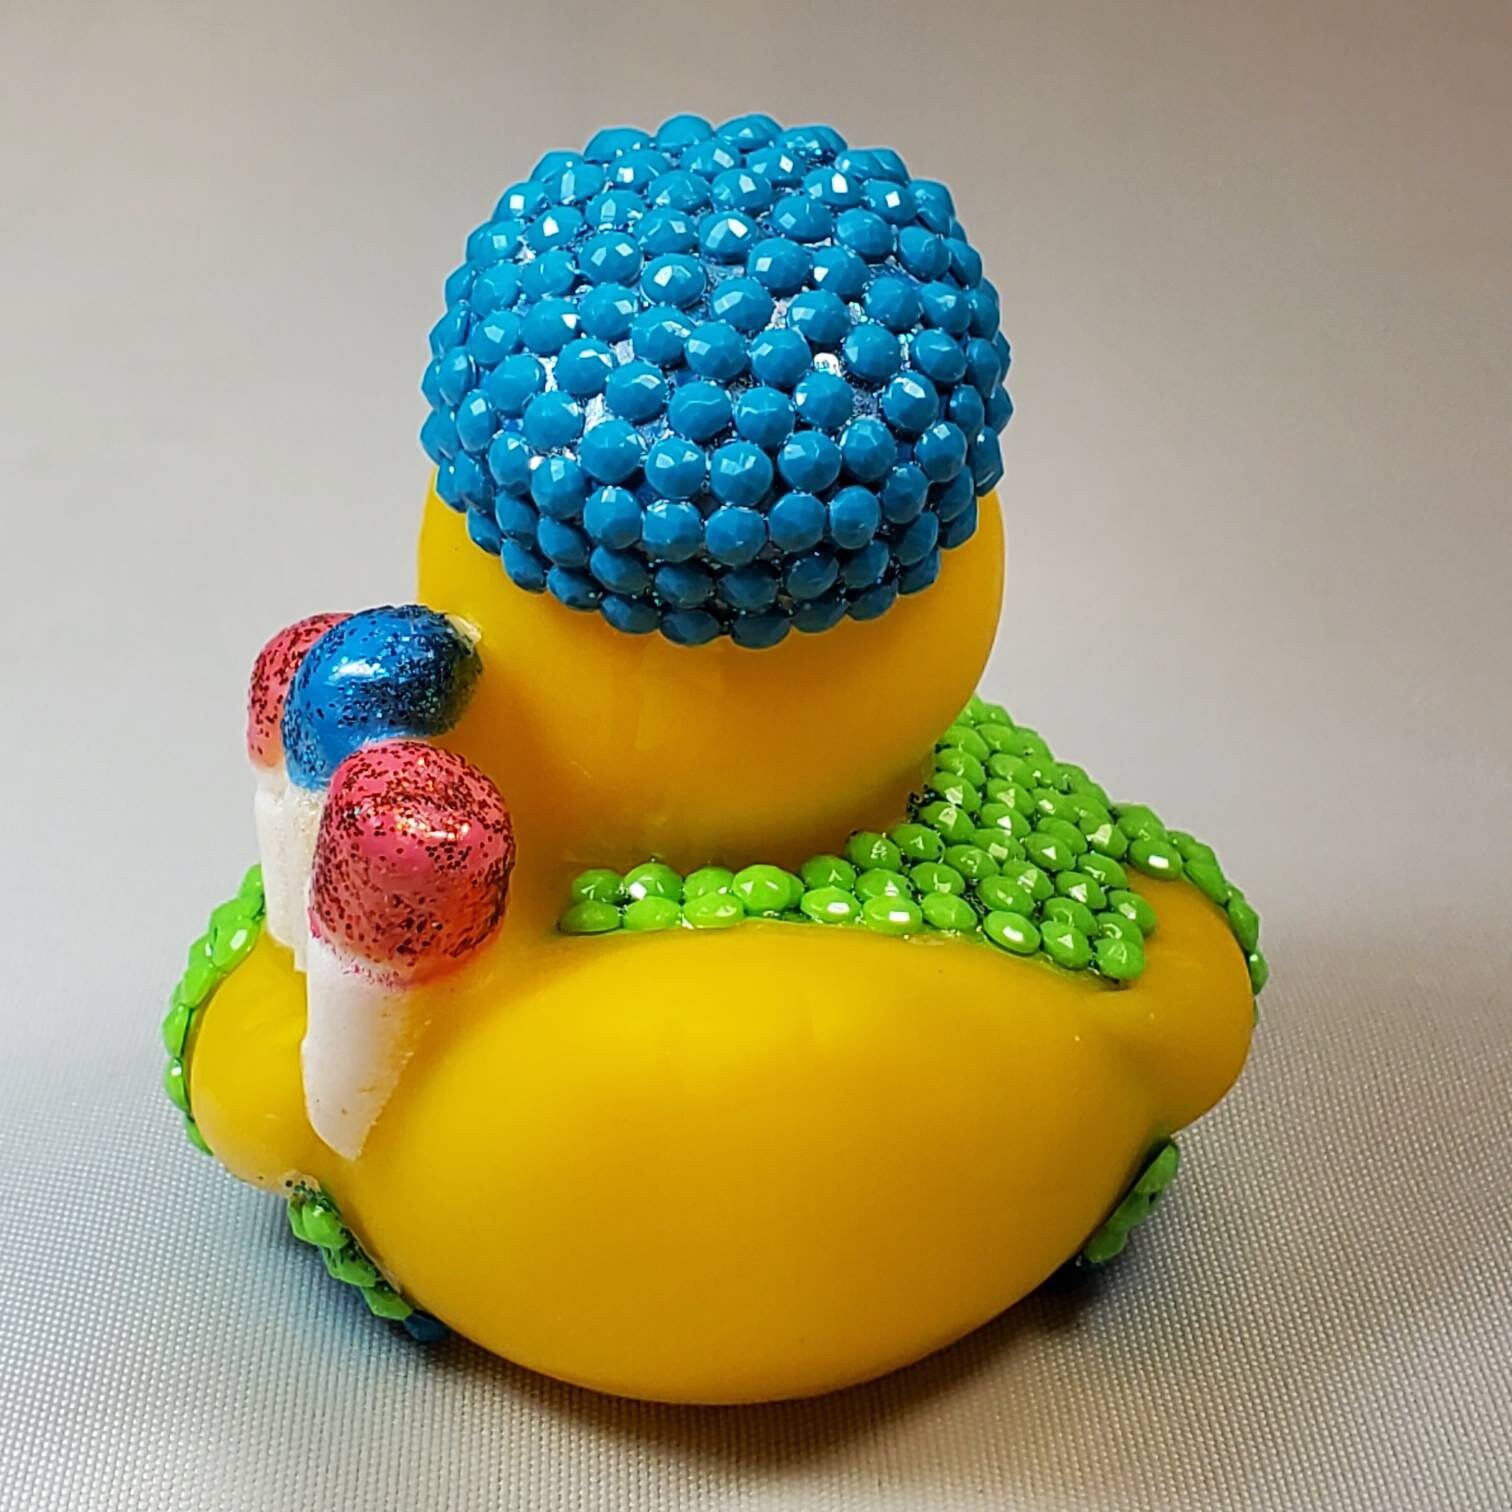 STRETCHY RUBBER DUCK by KEYCRAFT